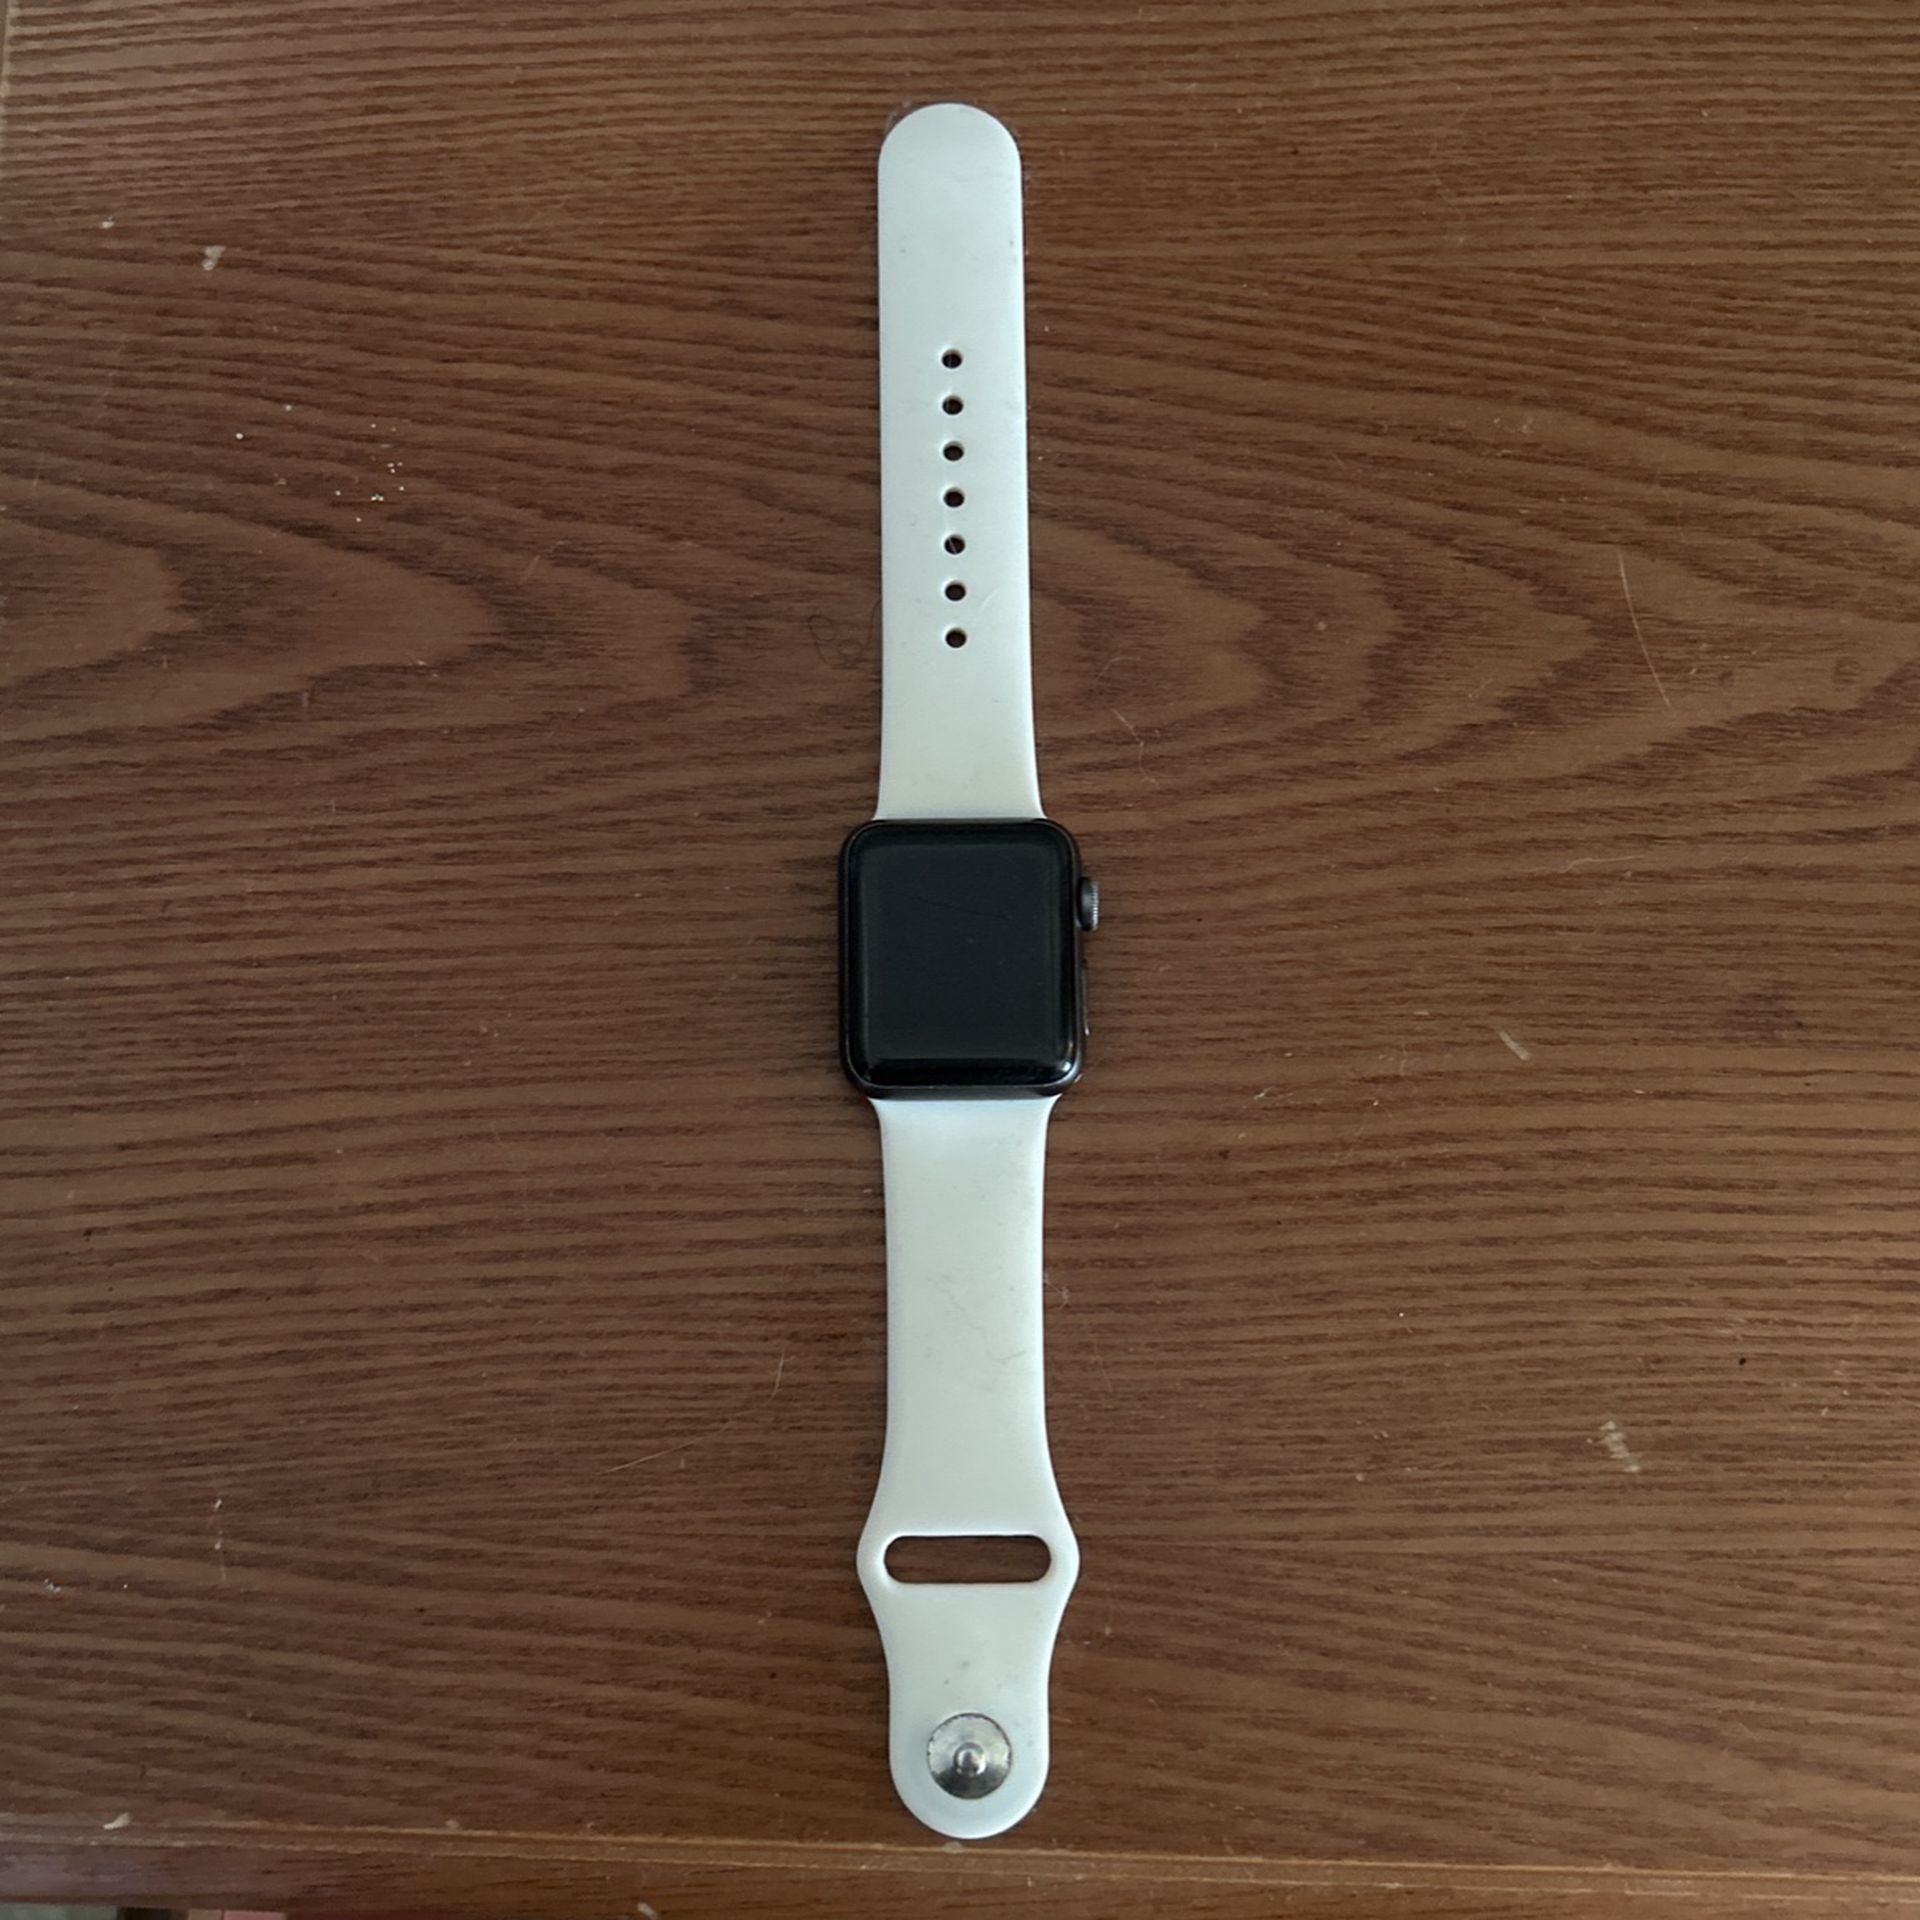 Apple Watch Series 3 (with 3 bands and charger) 